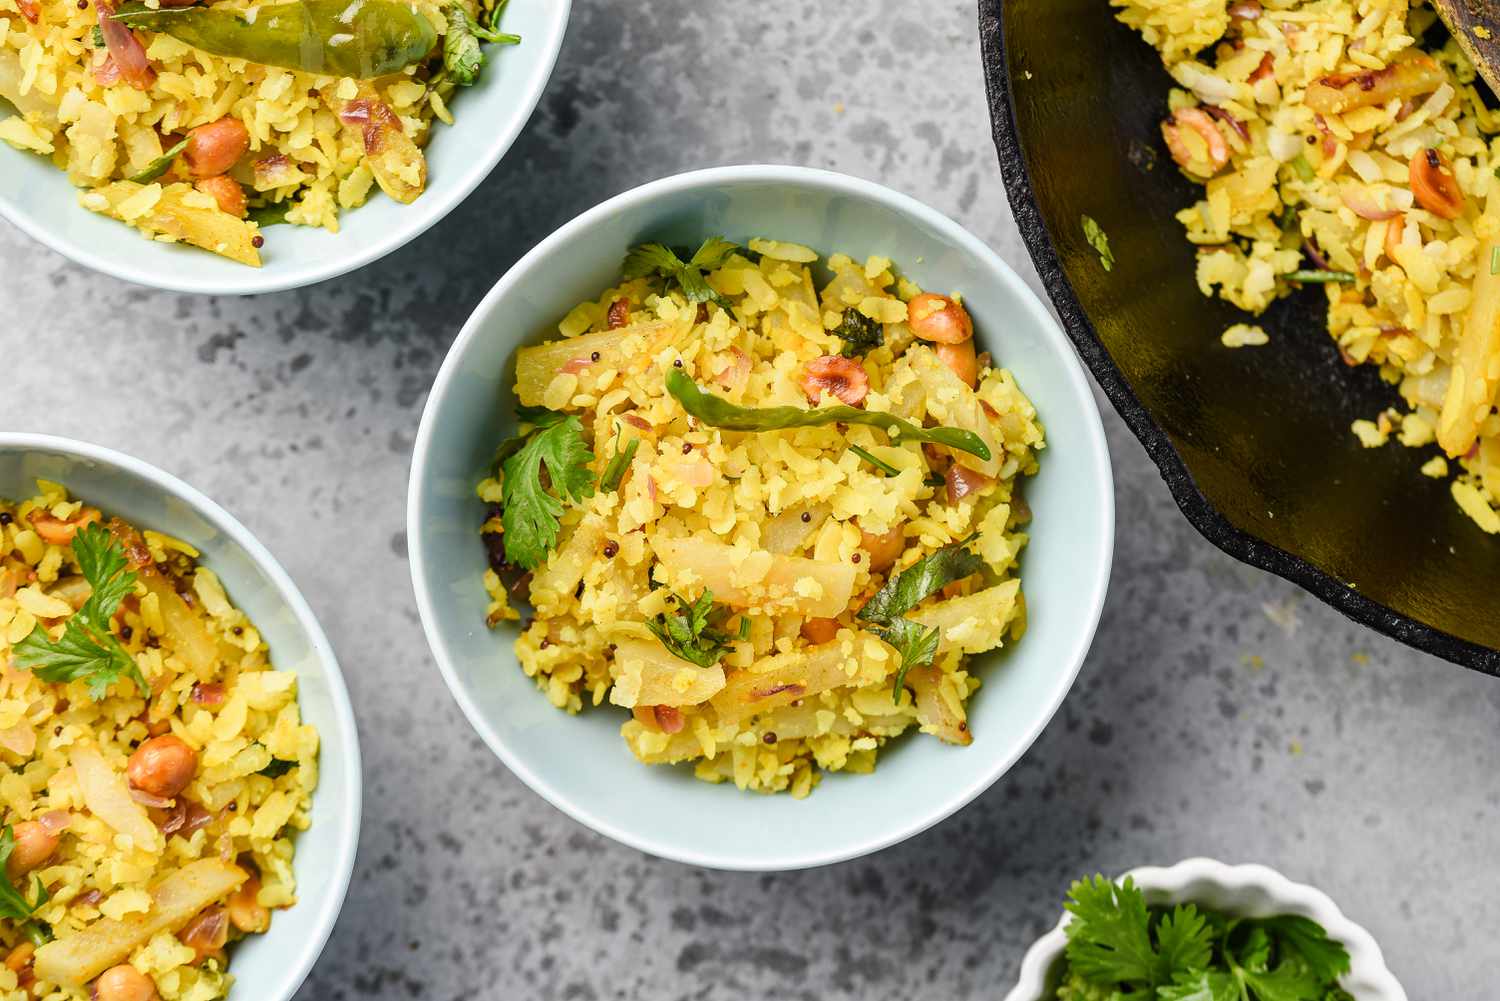 20-poha-nutrition-facts